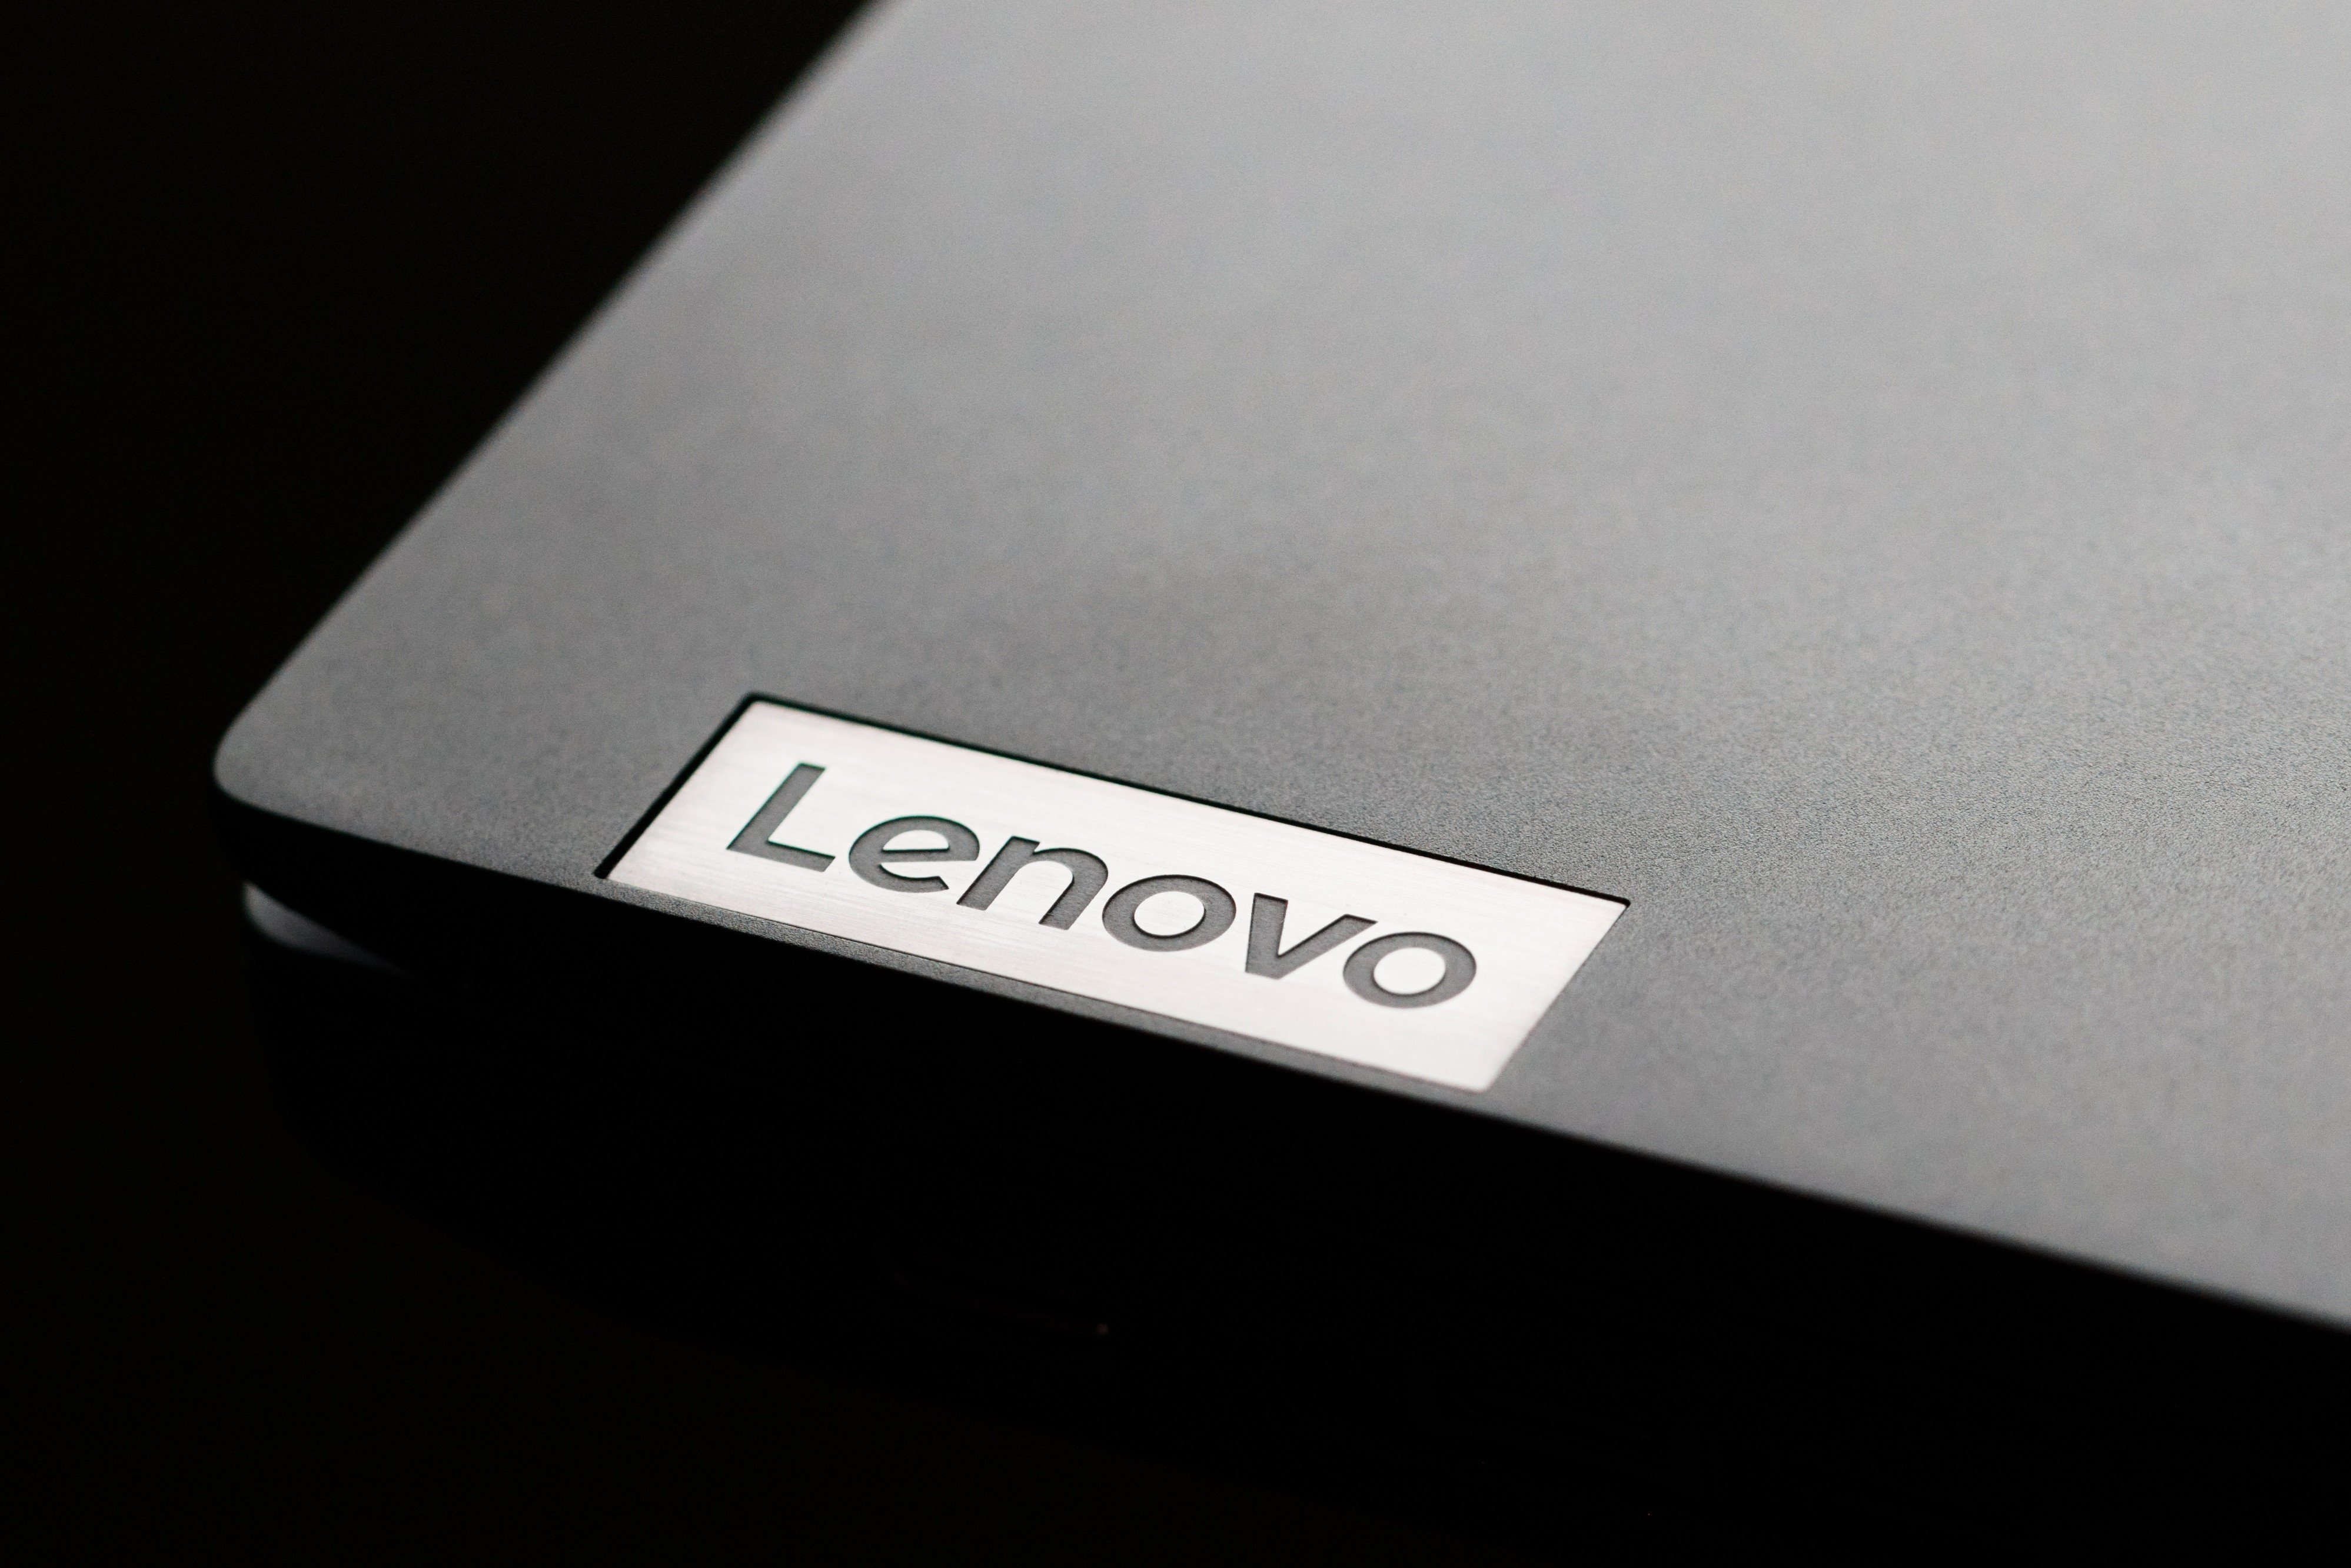 Lenovo is partnership with Alibaba to launch AI-powered devices. Photo: Shutterstock